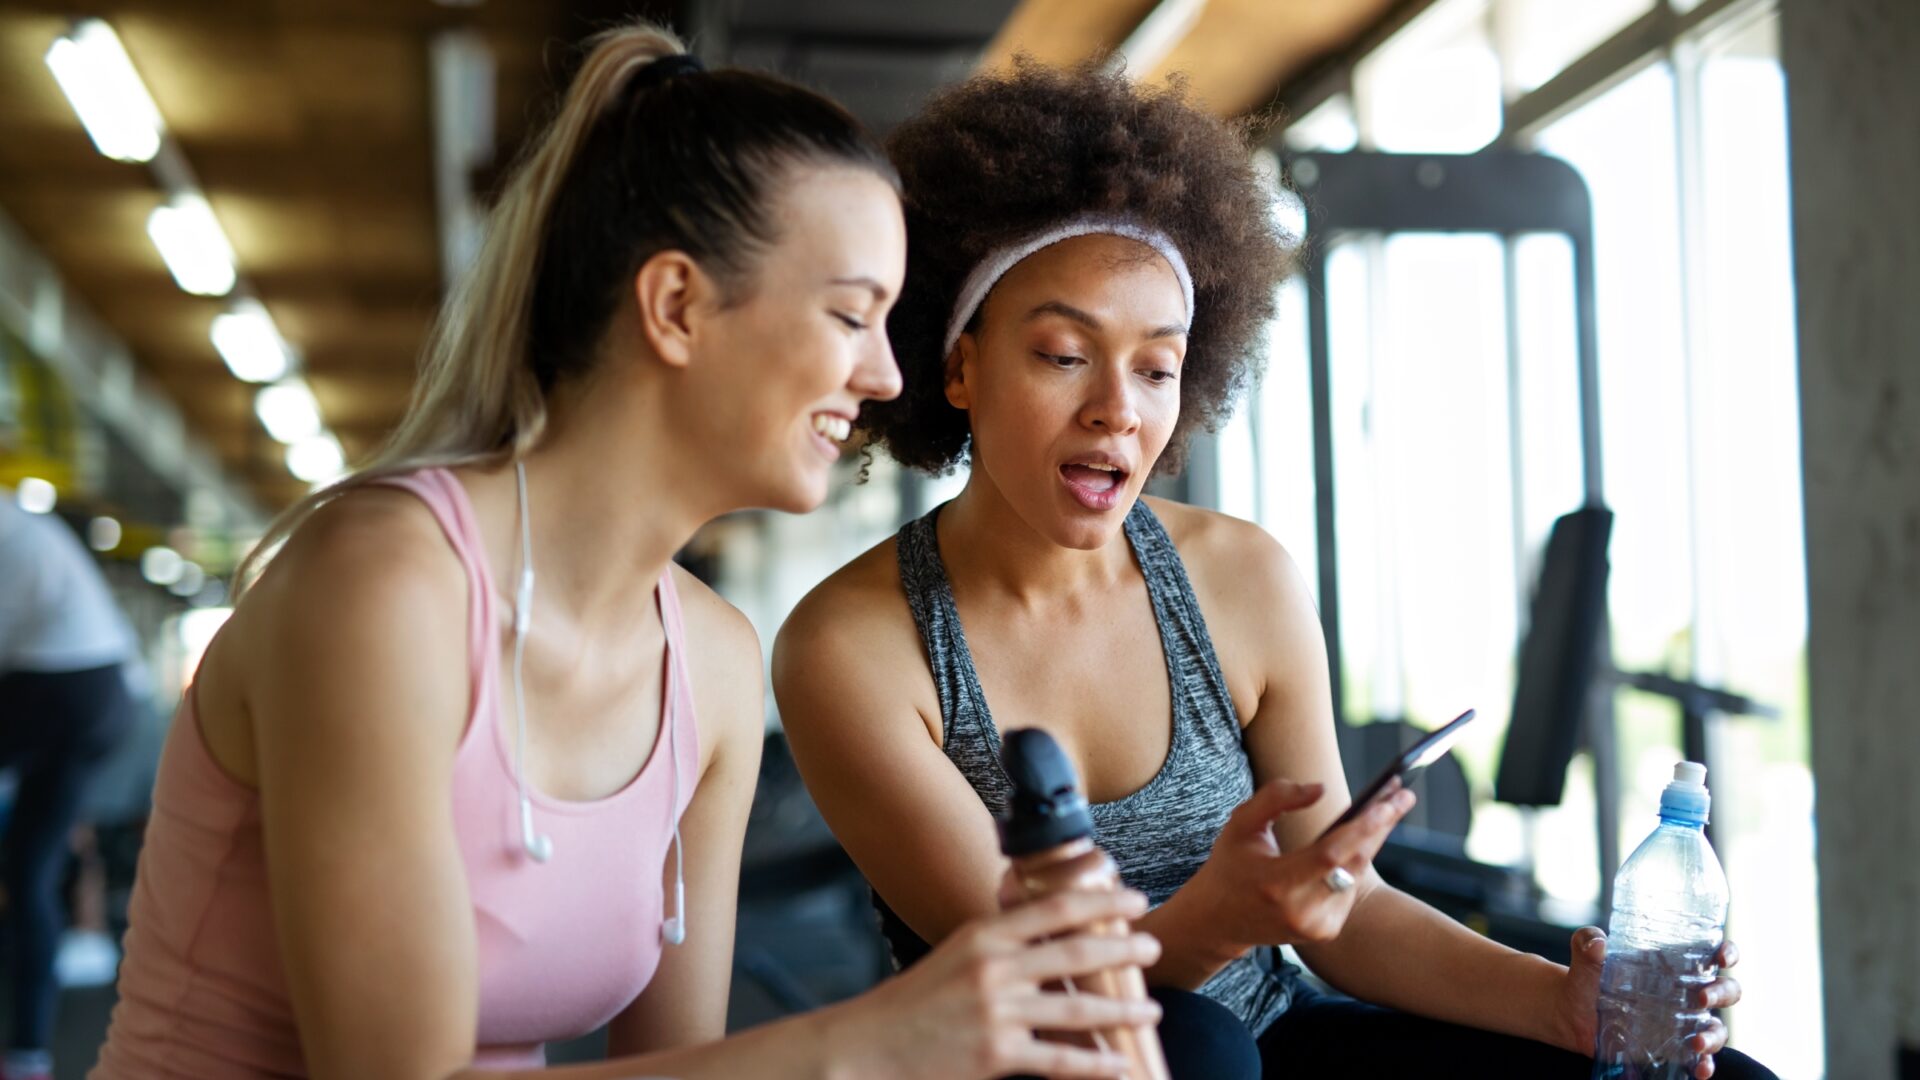 Two women at the gym smile at something on a phone.